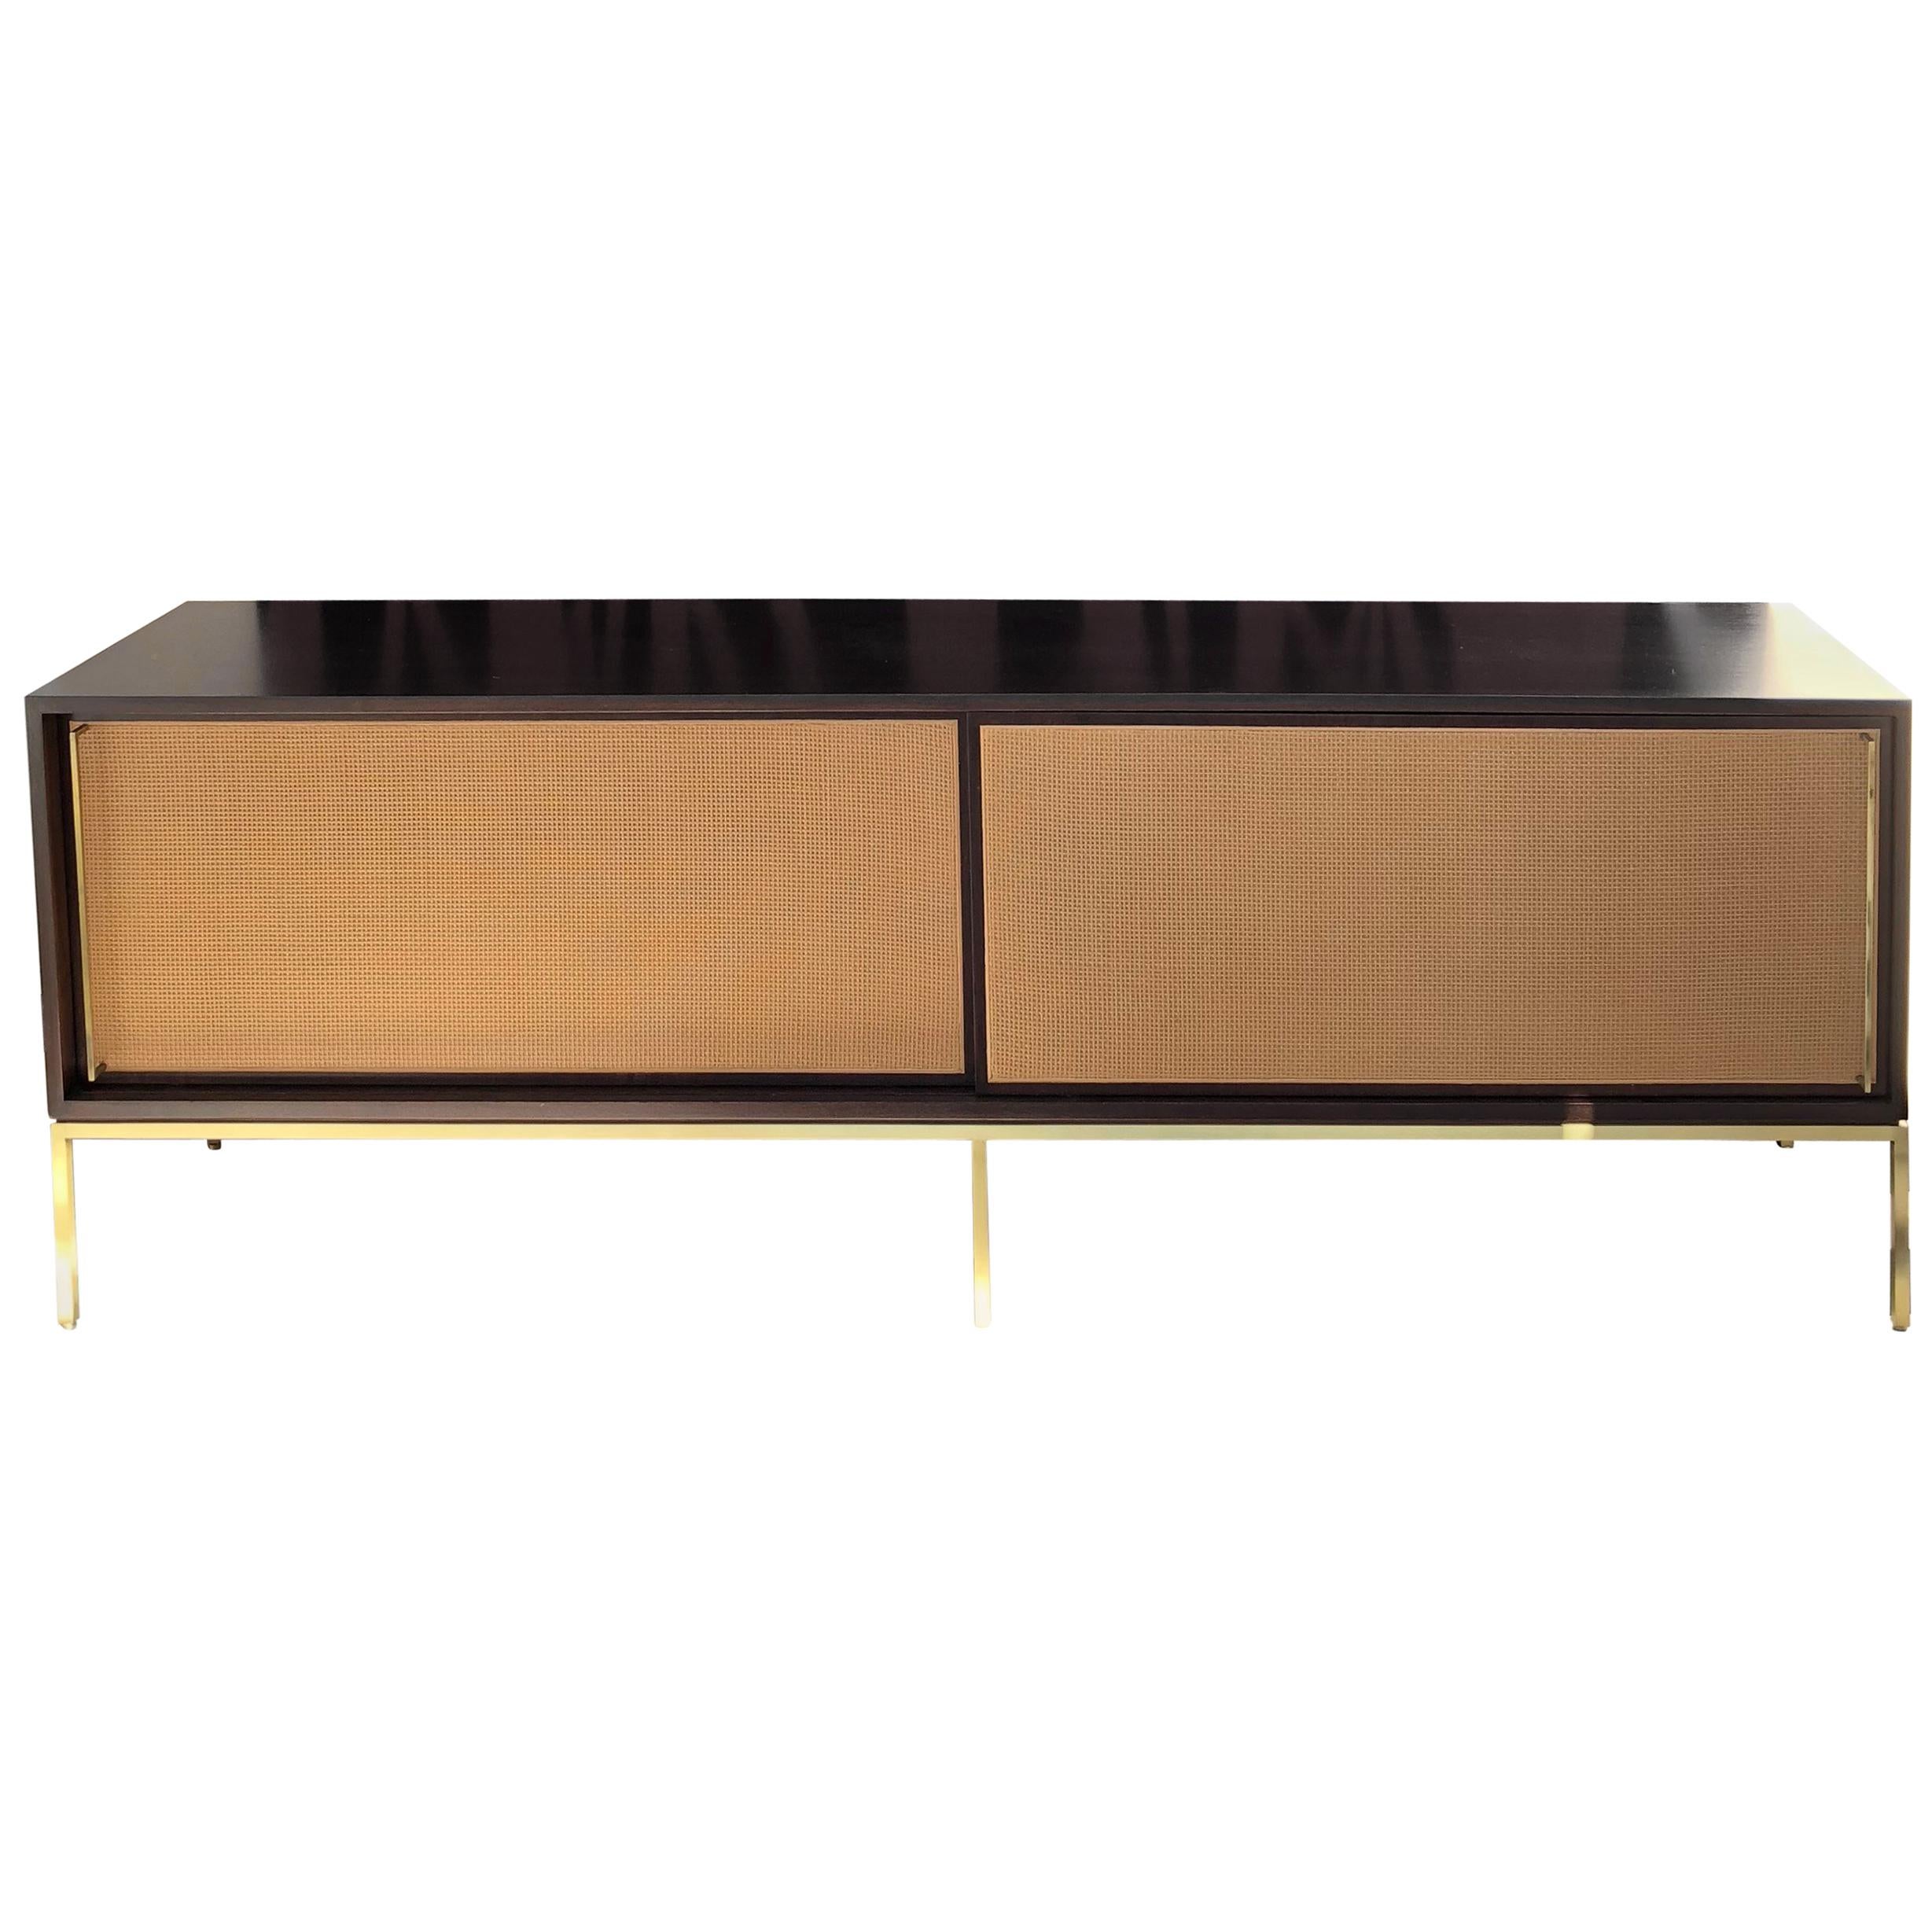 Re: 379 Credenza in Dark Walnut, Painted Cane and Satin Brass For Sale